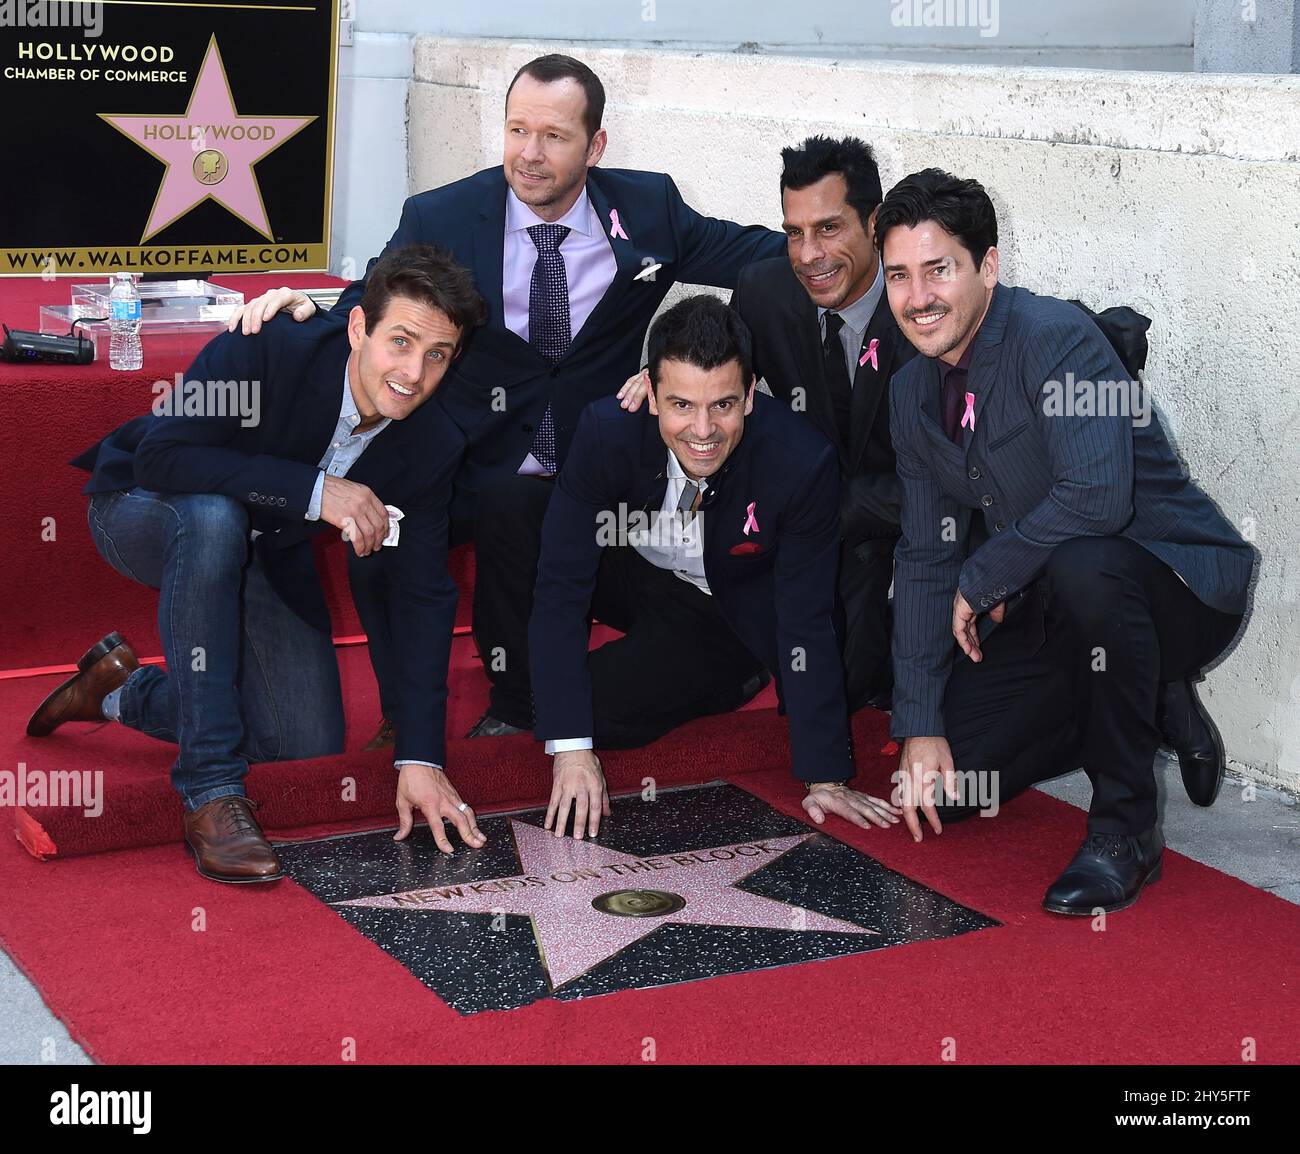 Donnie Wahlberg, Jordan Knight, Jonathan Knight, Joey McIntyre and Danny Wood attending the New Kids on the Block Walk of Fame Star Ceremony on Hollywood Blvd, Hollywood, California. Stock Photo